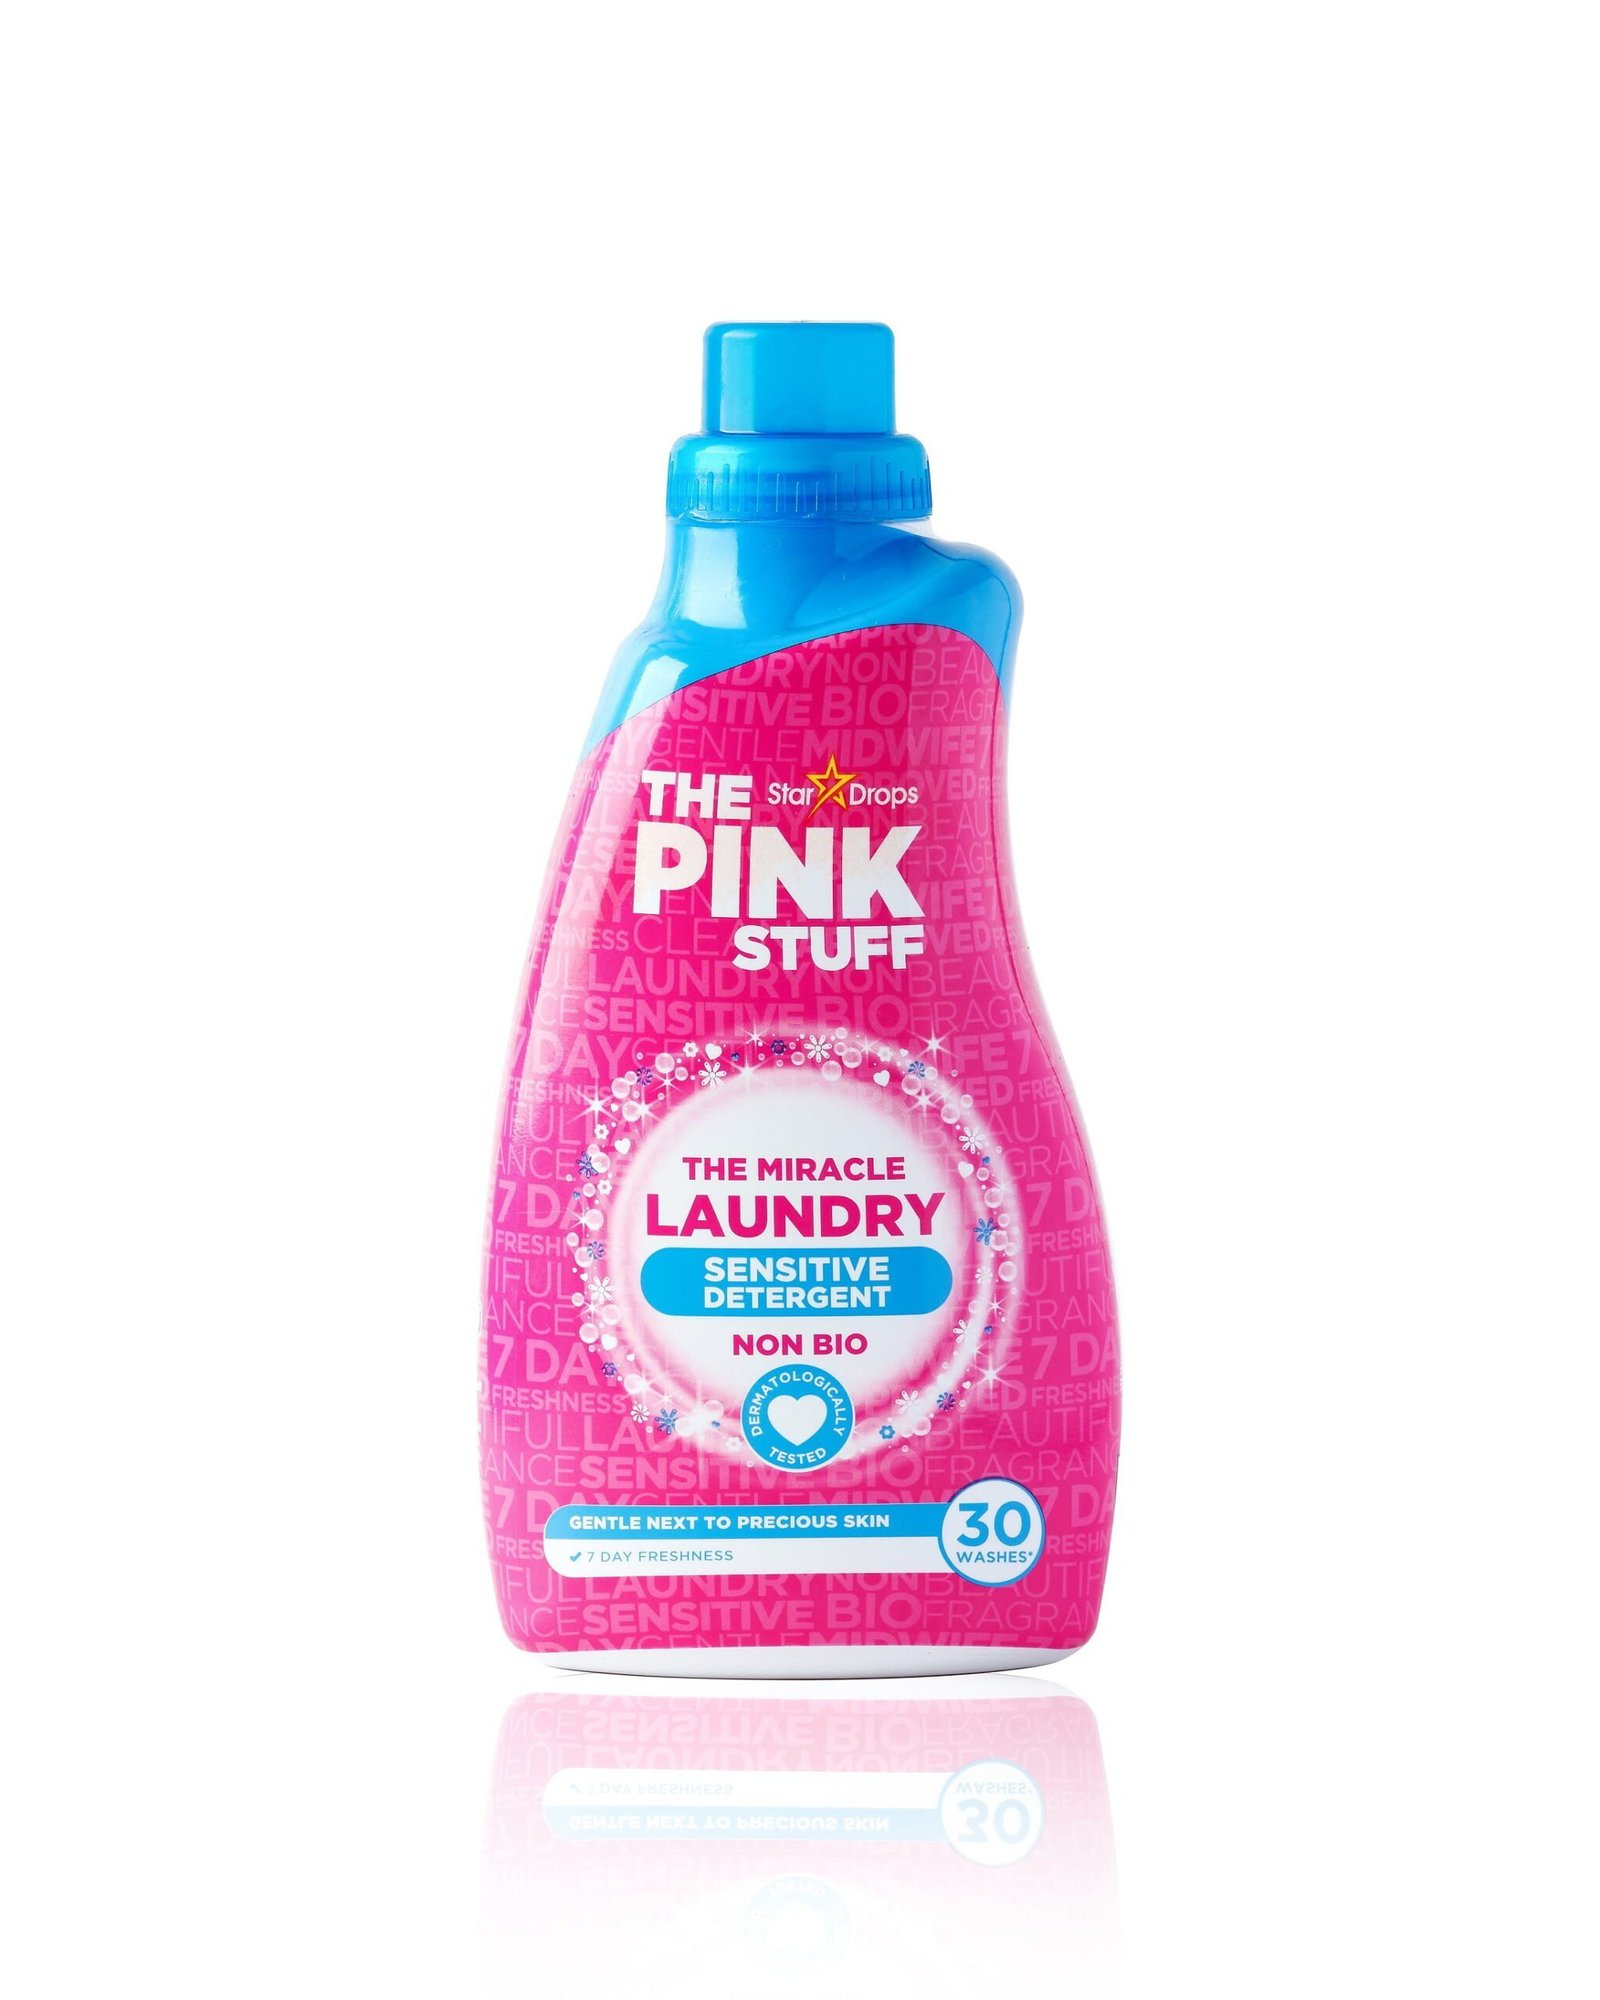 THE PINK STUFF The Miracle Laundry Fabric Conditioner 